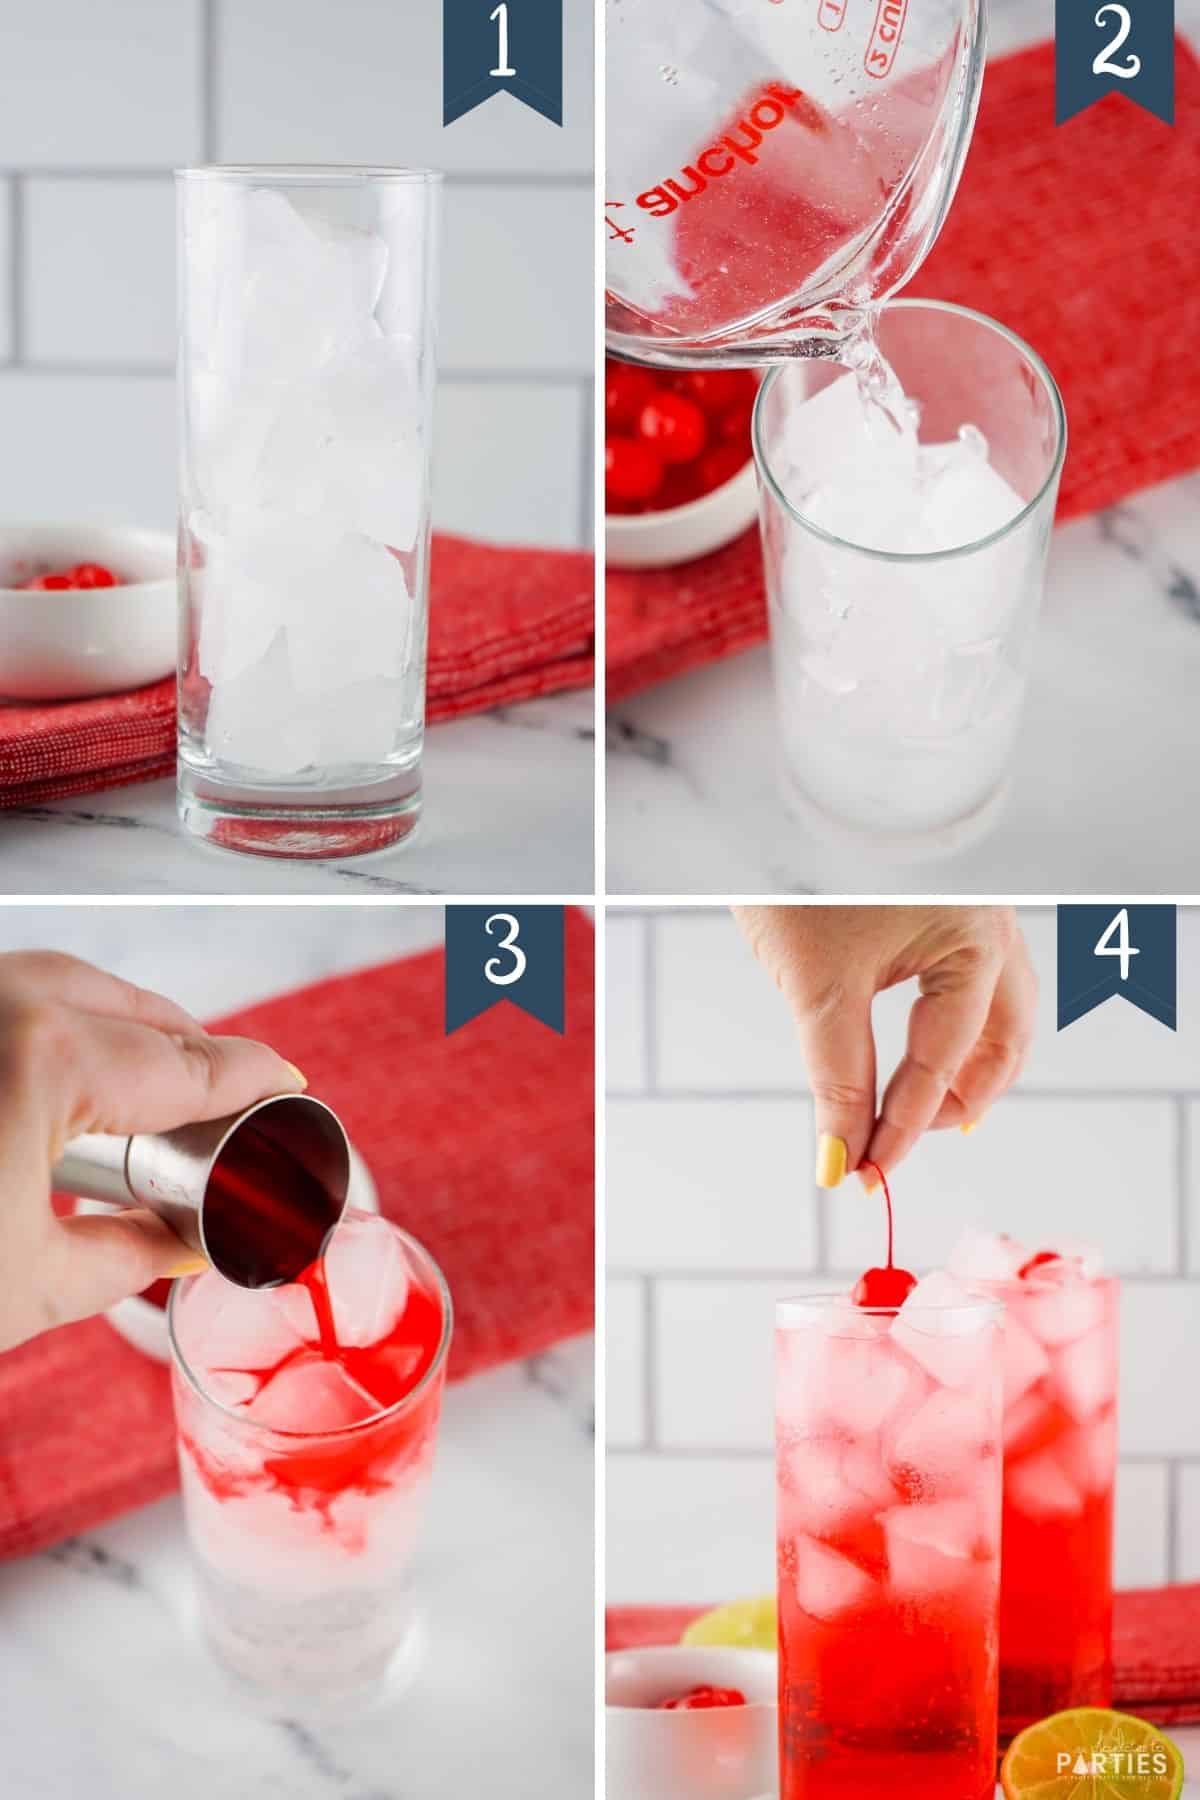 How to Make a Shirley Temple Drink Step by Step.